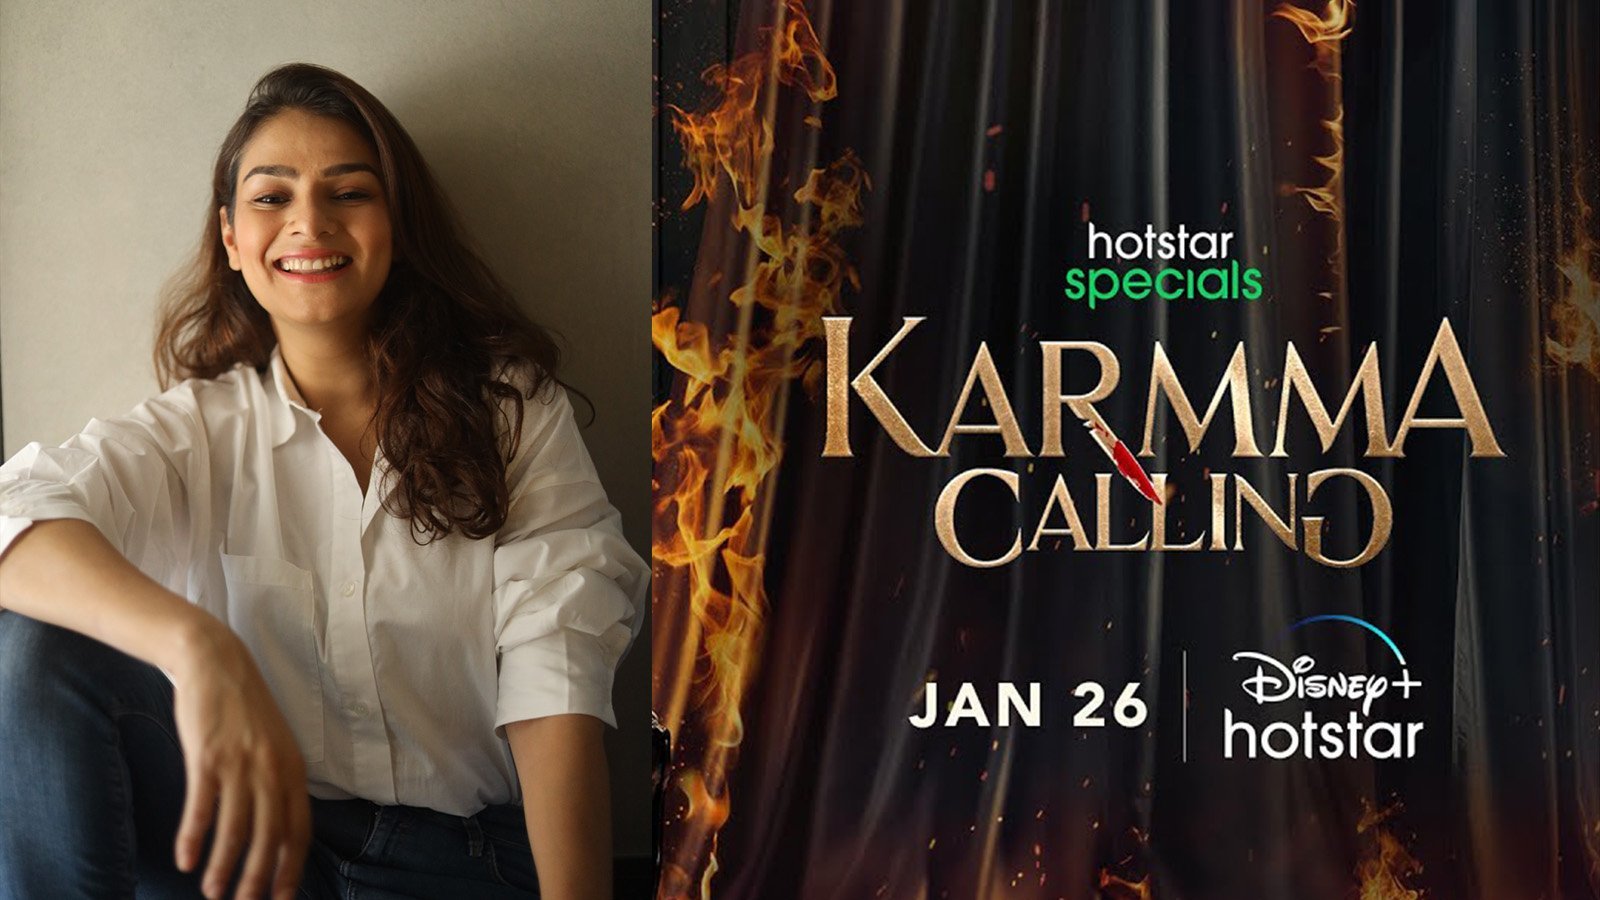 Behind the Scenes with Panchami Ghavri: Decoding the Casting Enigma of 'Karmma Calling' with Namrata Sheth and Varun Sood!